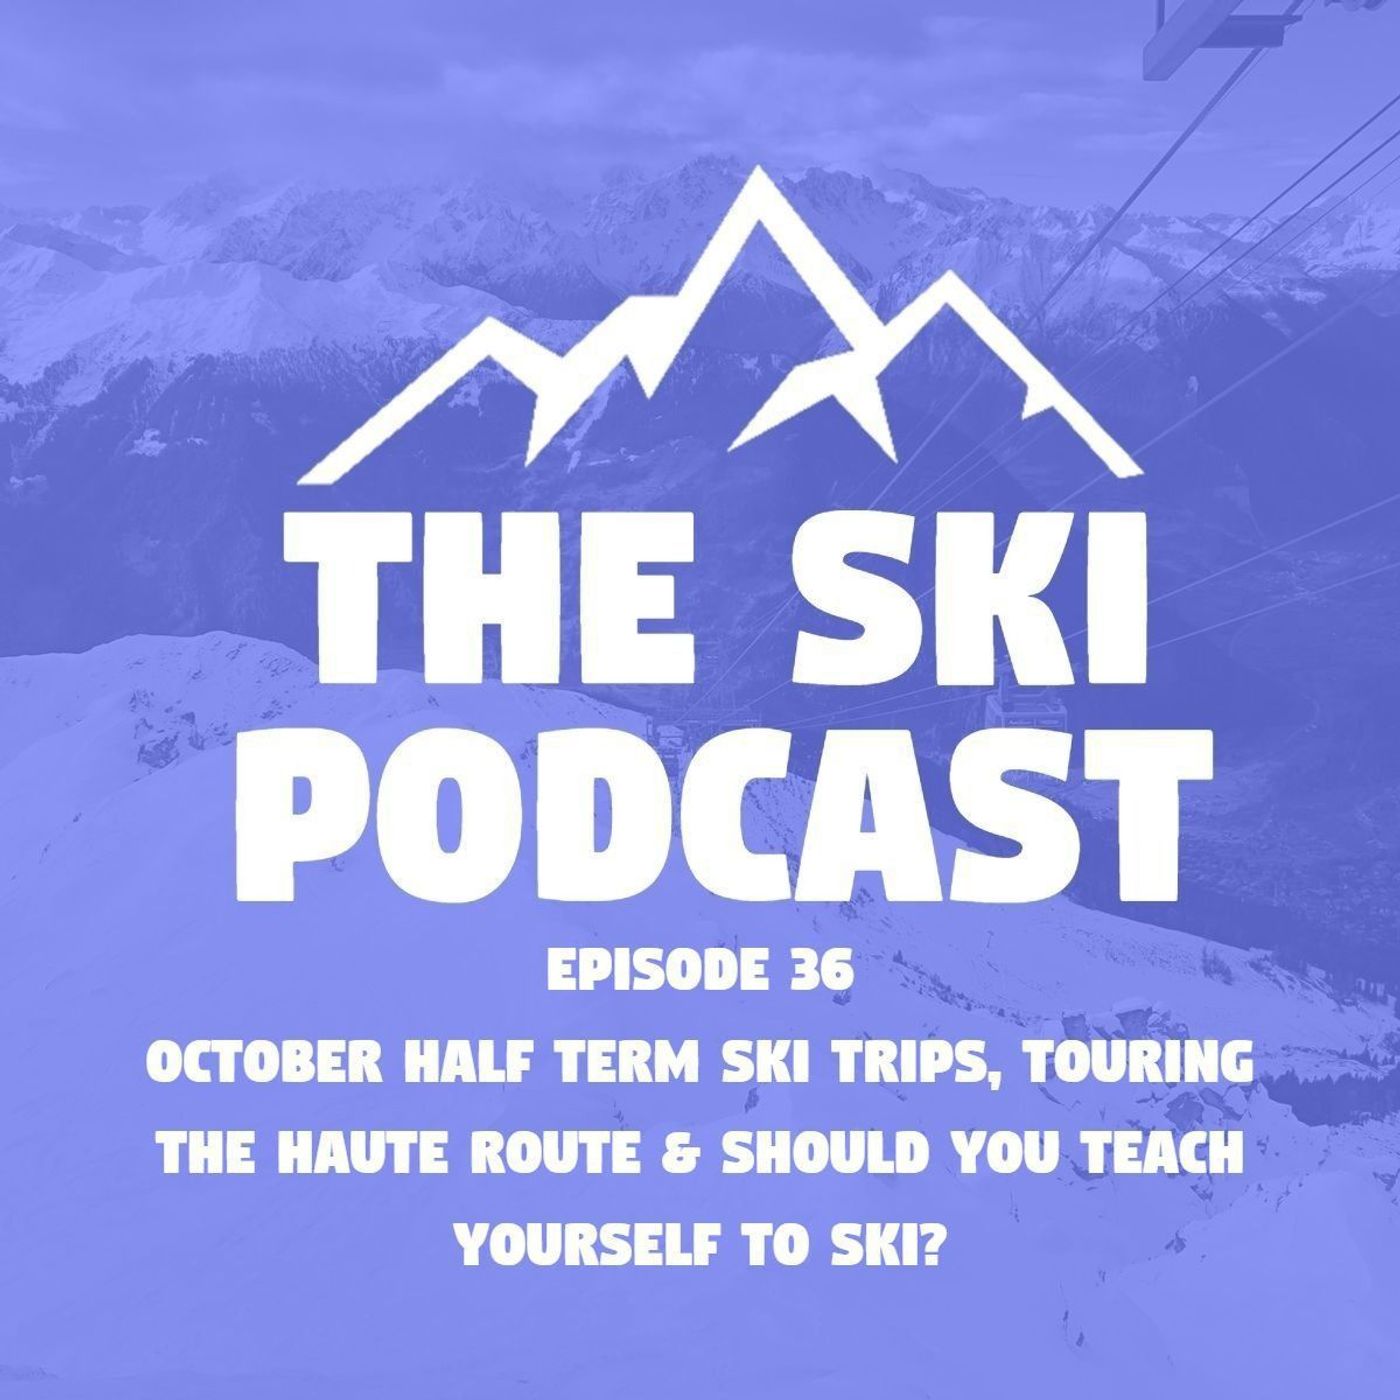 36: October Half Term Ski Trips, Touring The Haute Route & Should You Teach Yourself to Ski?